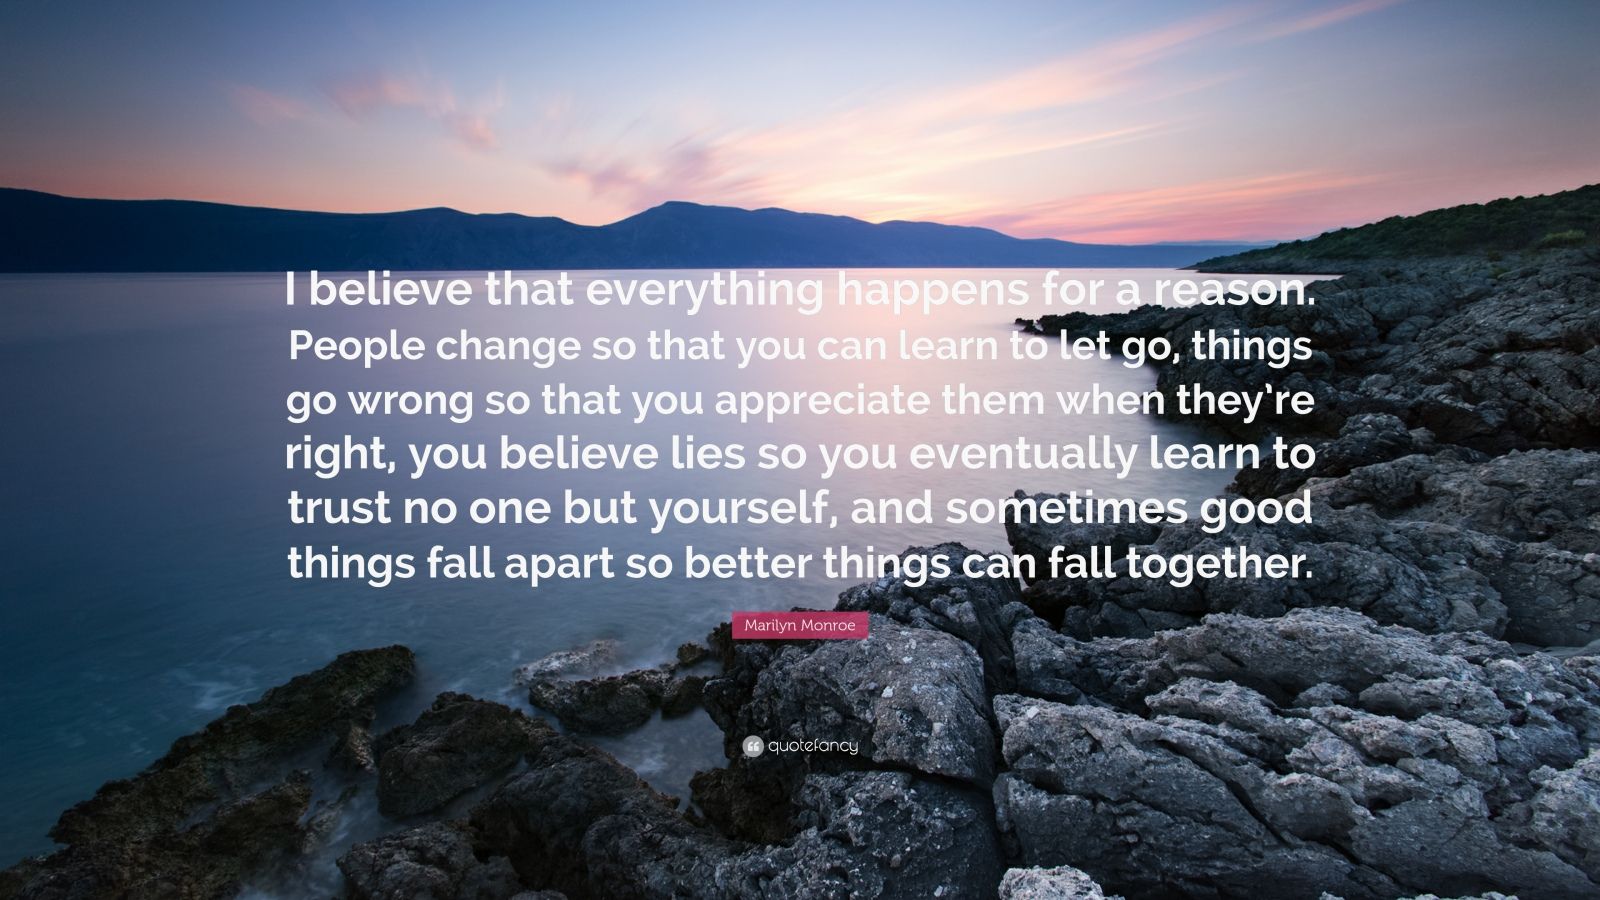 Marilyn Monroe Quote: “I believe that everything happens for a reason